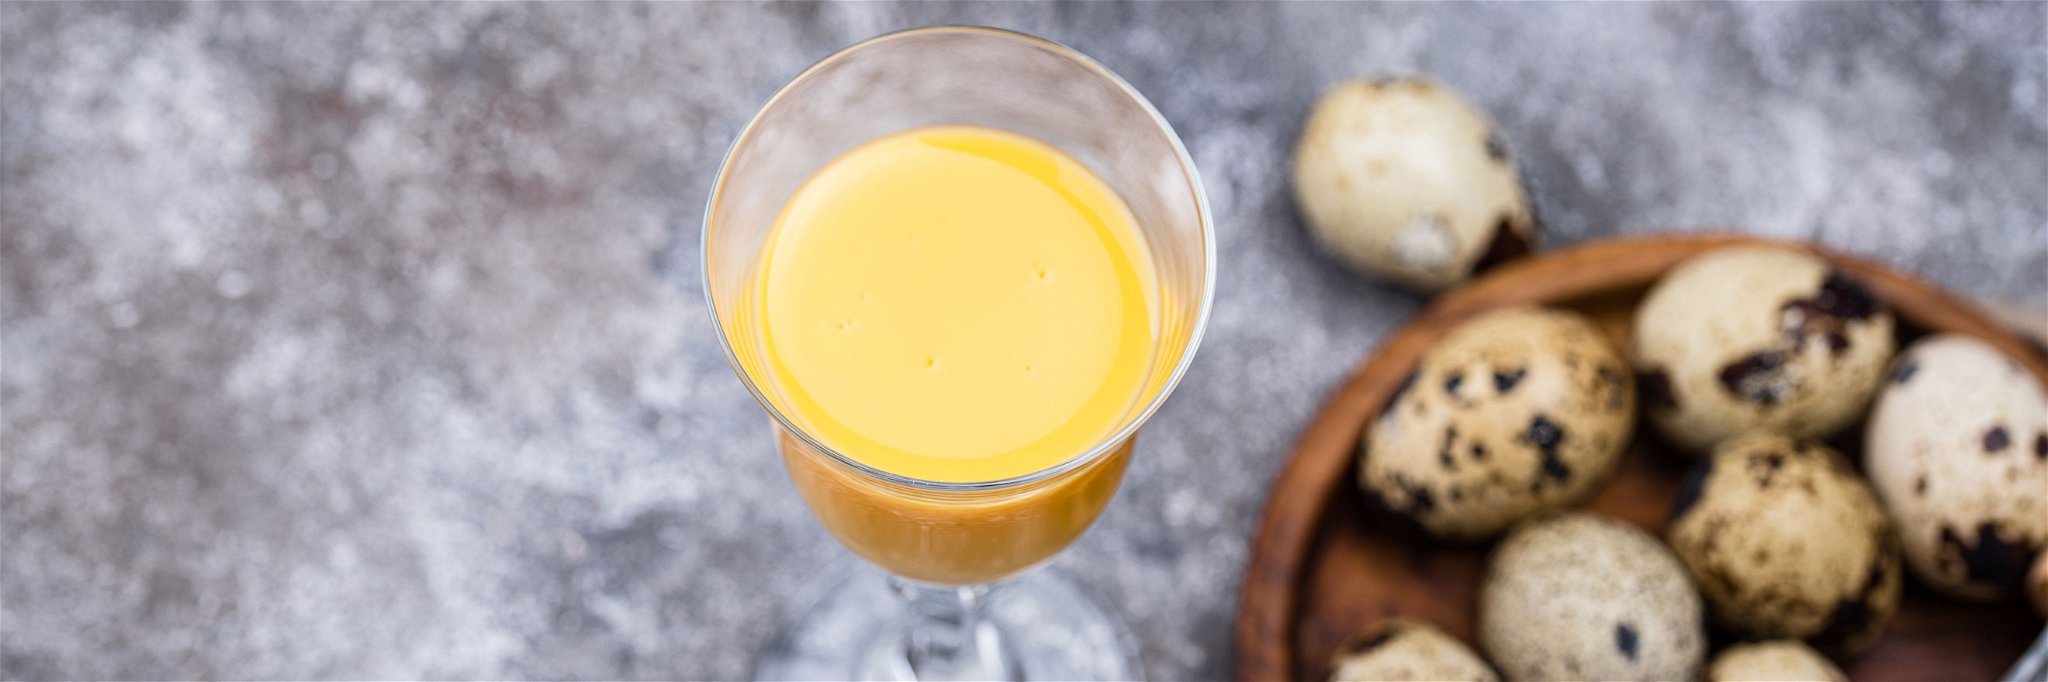 Enjoy an adult Easter with advocaat's creamy, sweet flavour.&nbsp;